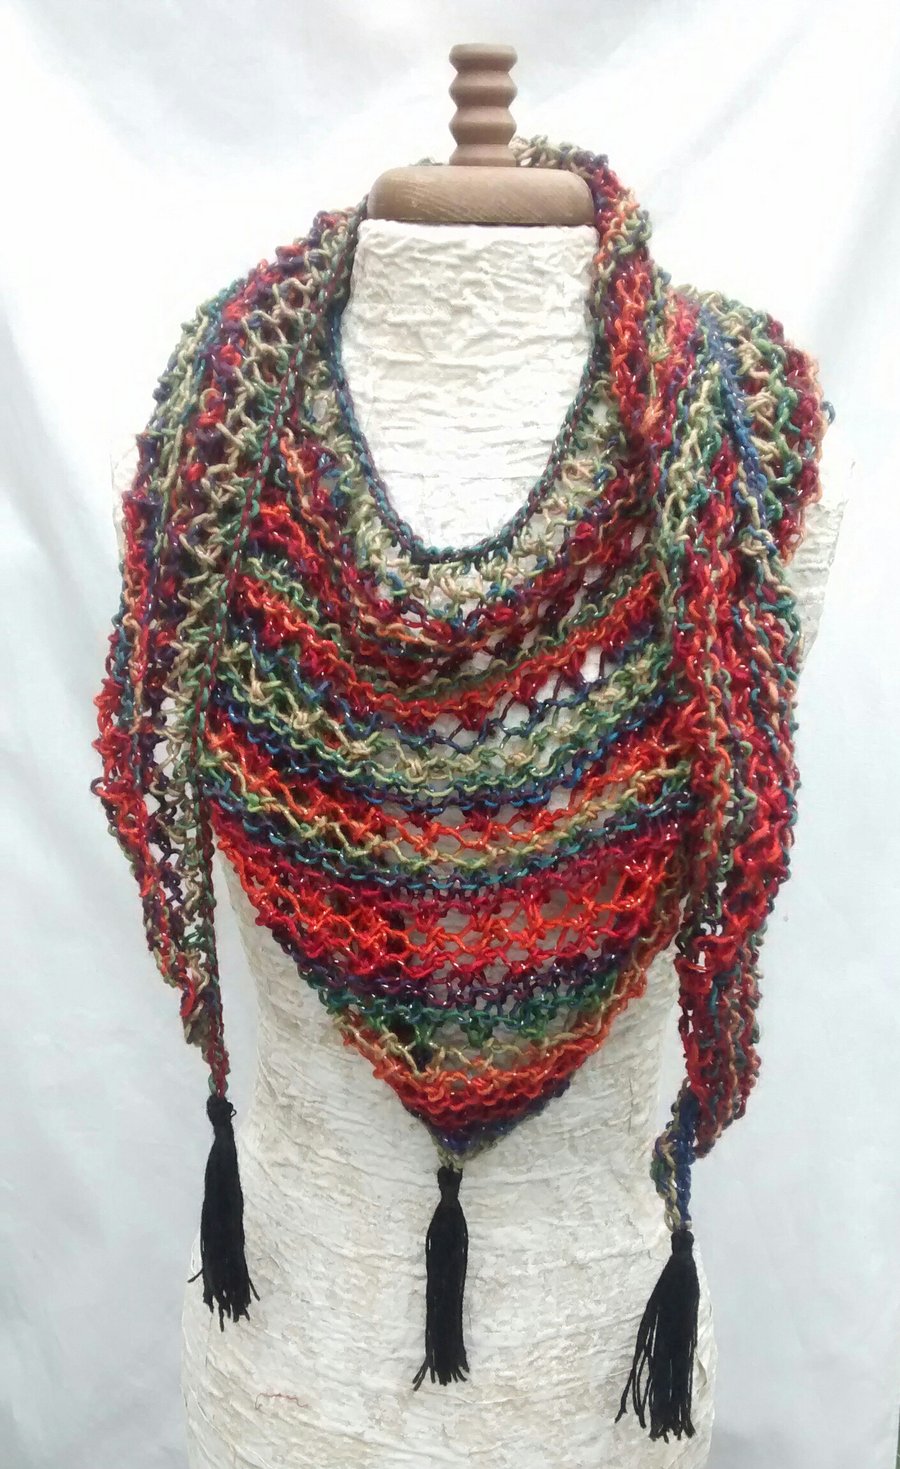 Triangular Lace Knit Scarf, Shawl, Wrap in Autumn Colours